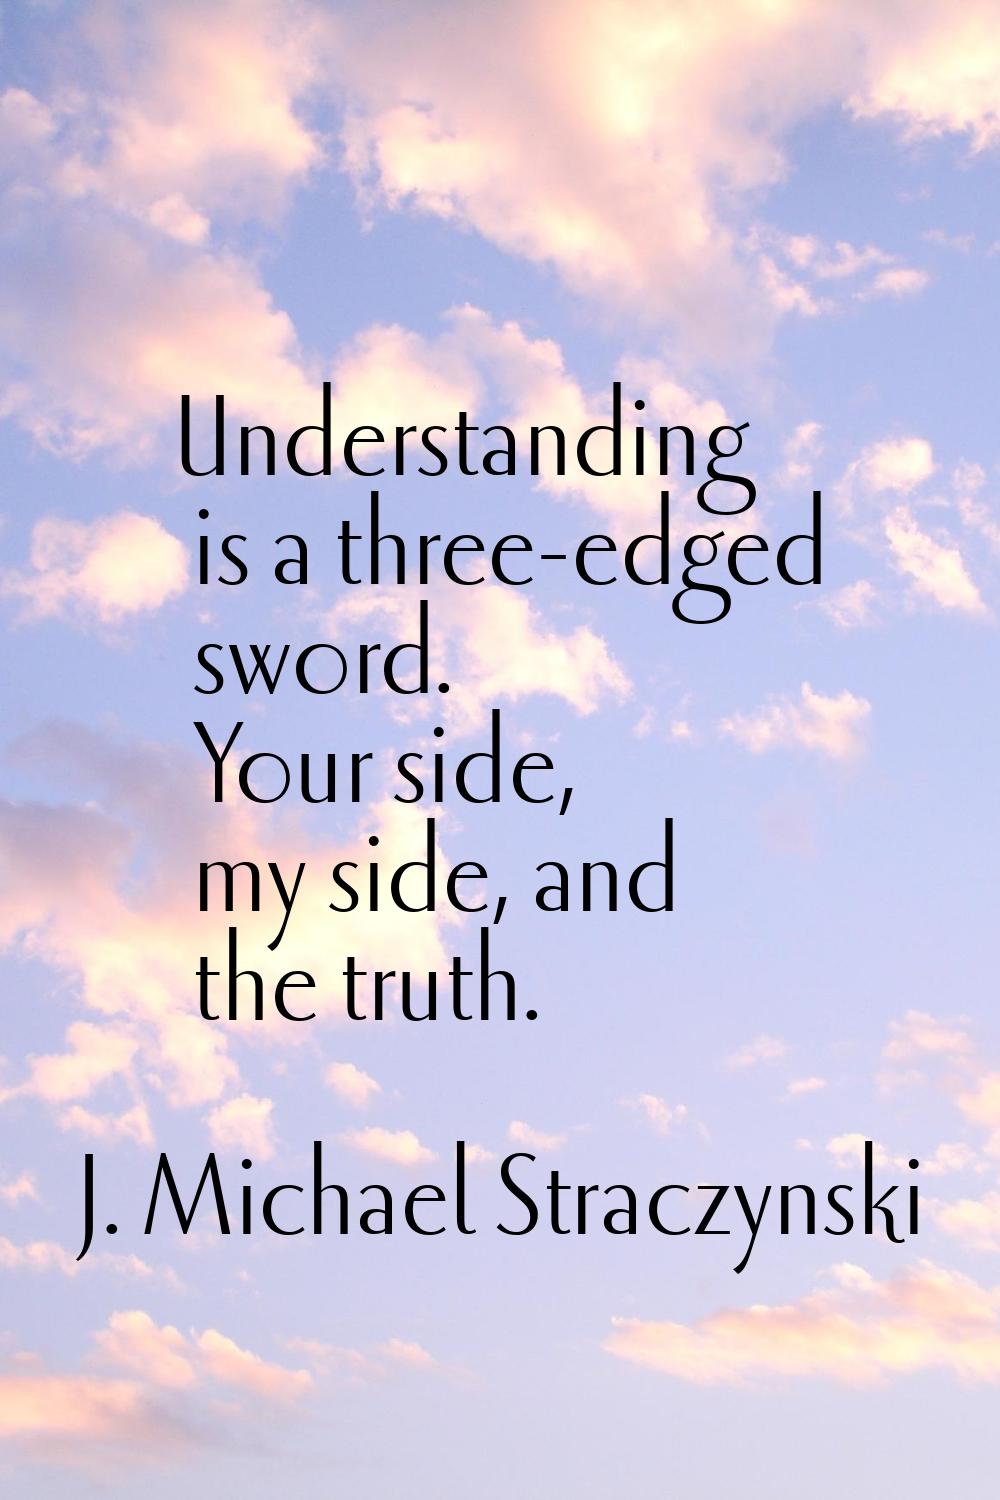 Understanding is a three-edged sword. Your side, my side, and the truth.